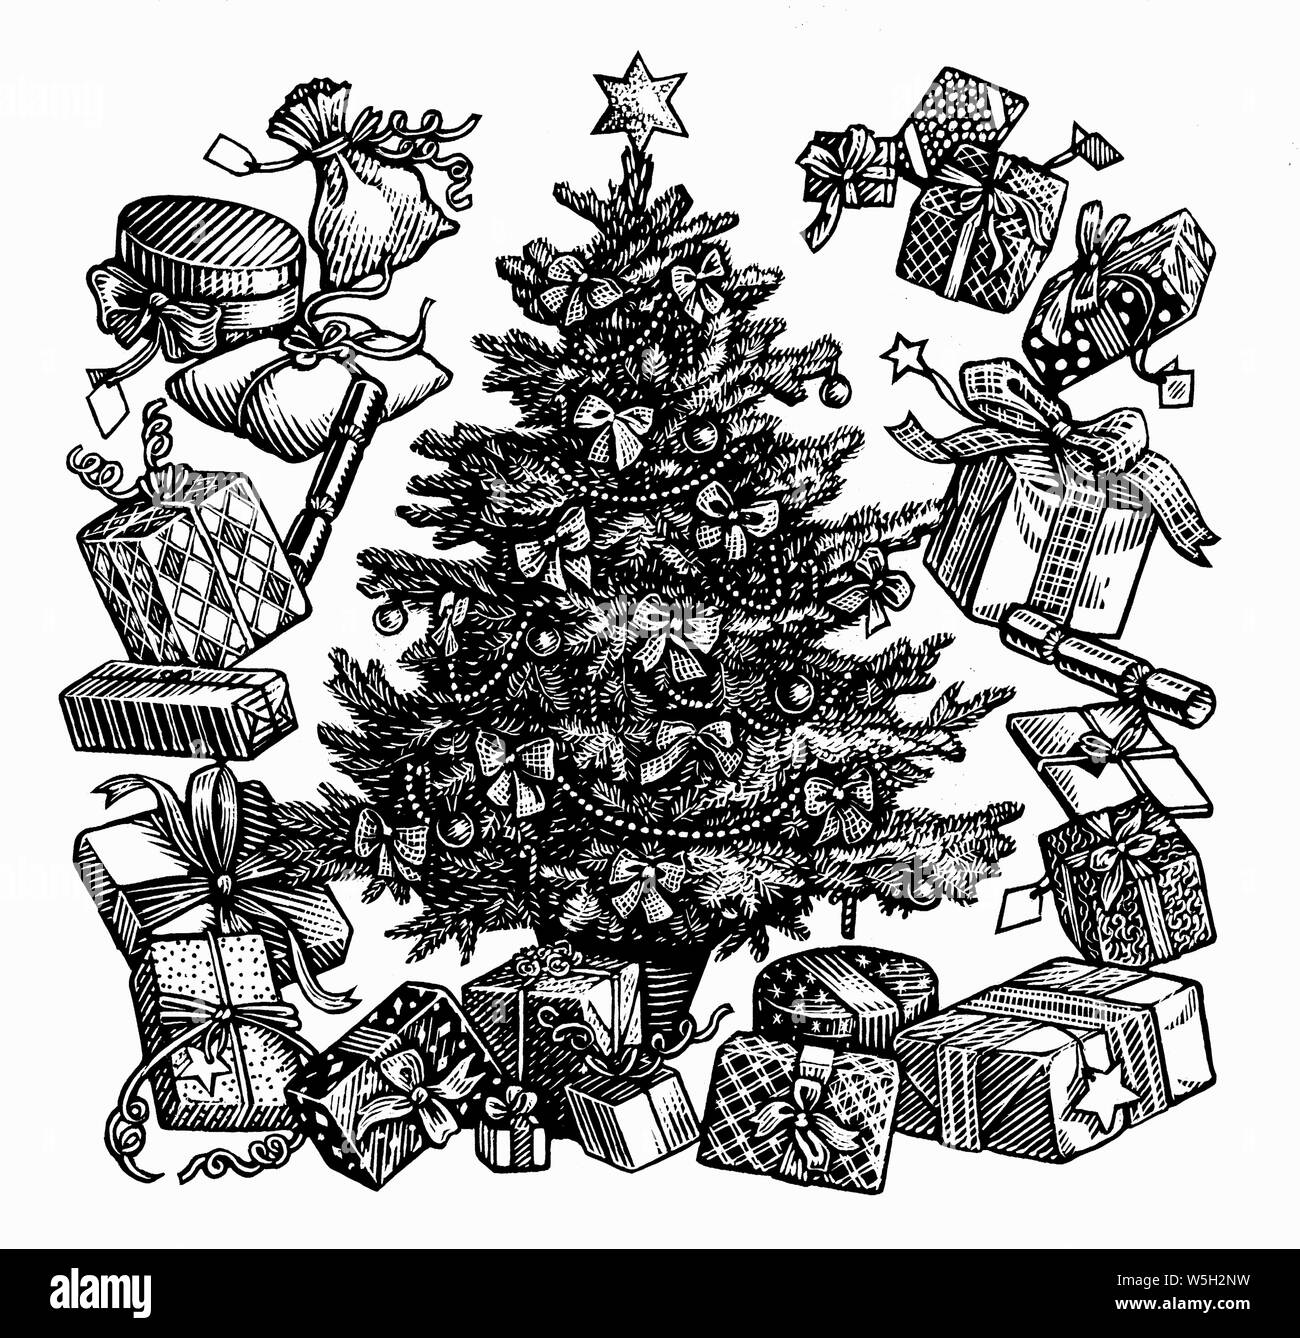 Black and white scraperboard engraving of decorated Christmas tree surrounded by presents Stock Photo